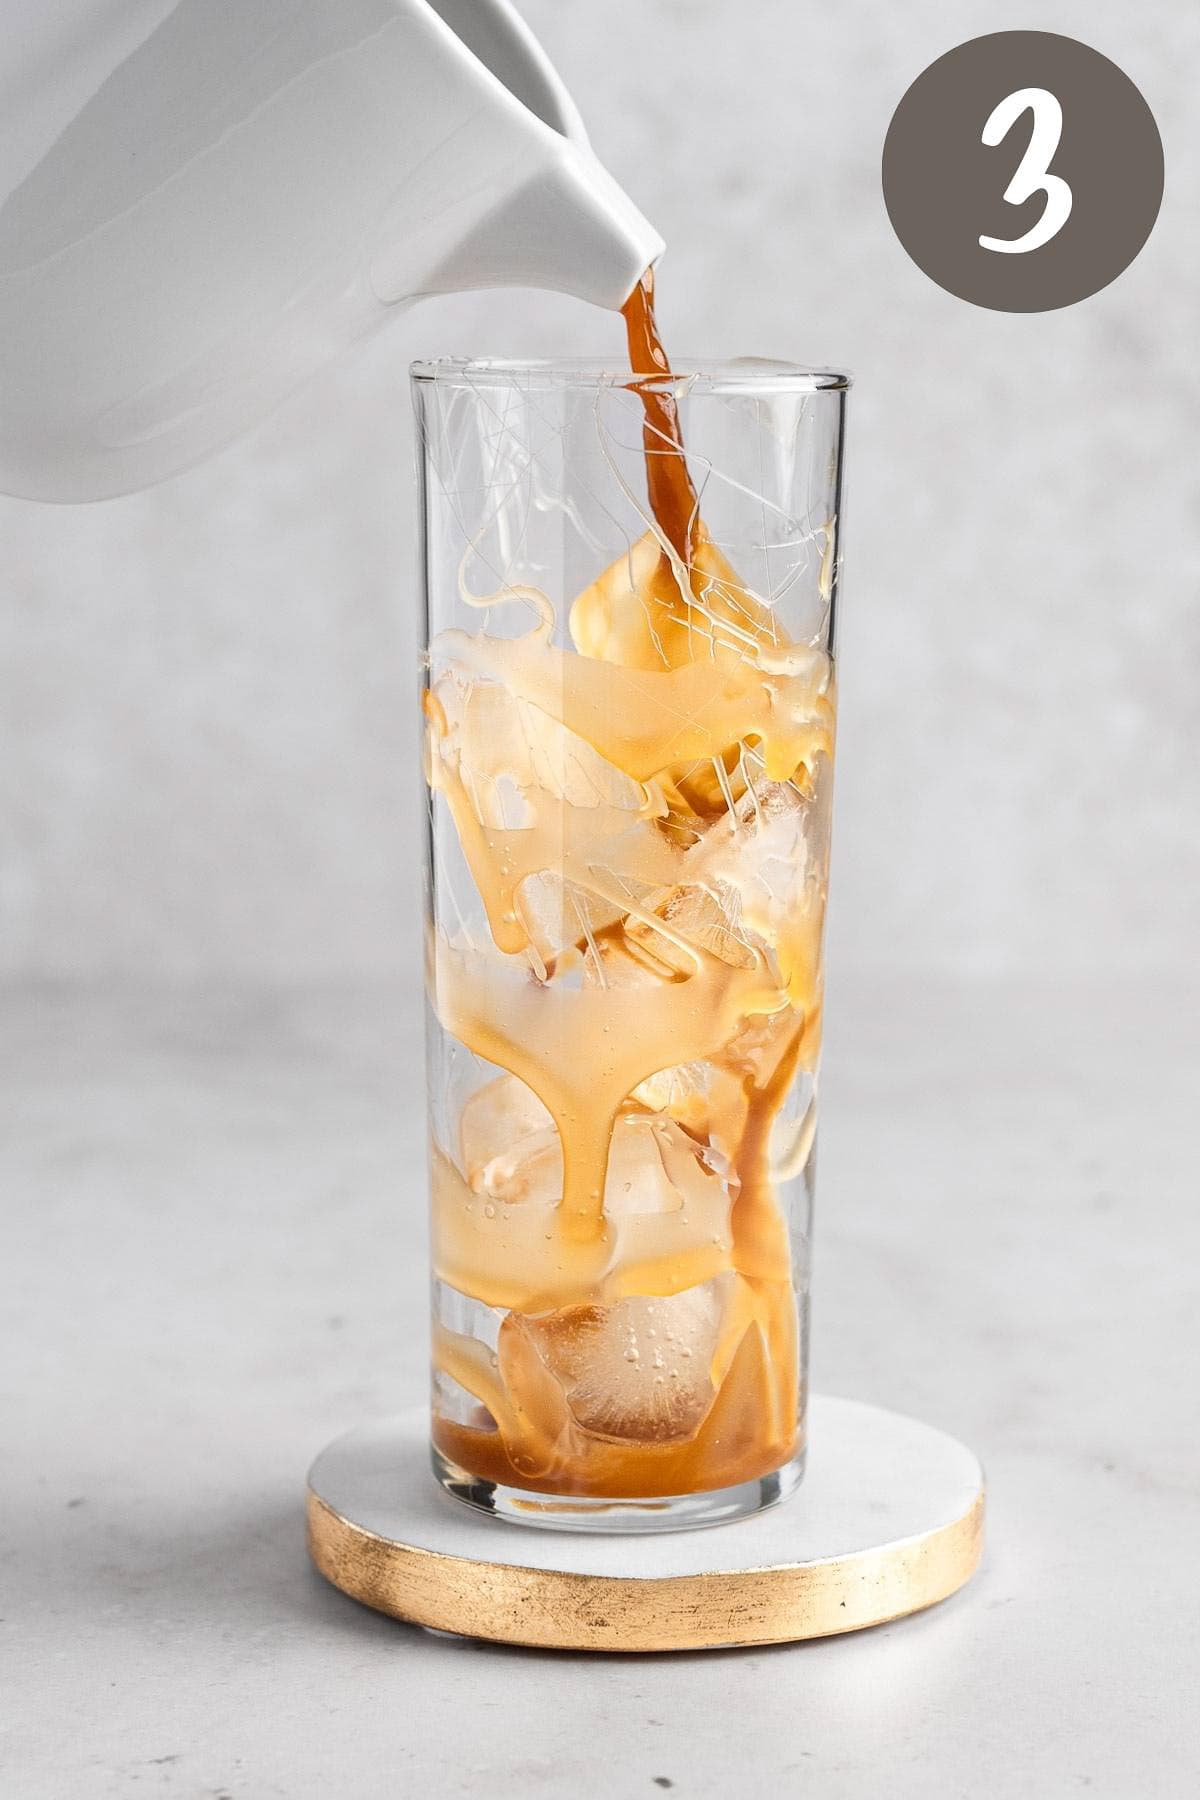 Process photo illustrating the caramel coffee being poured into a glass with ice.